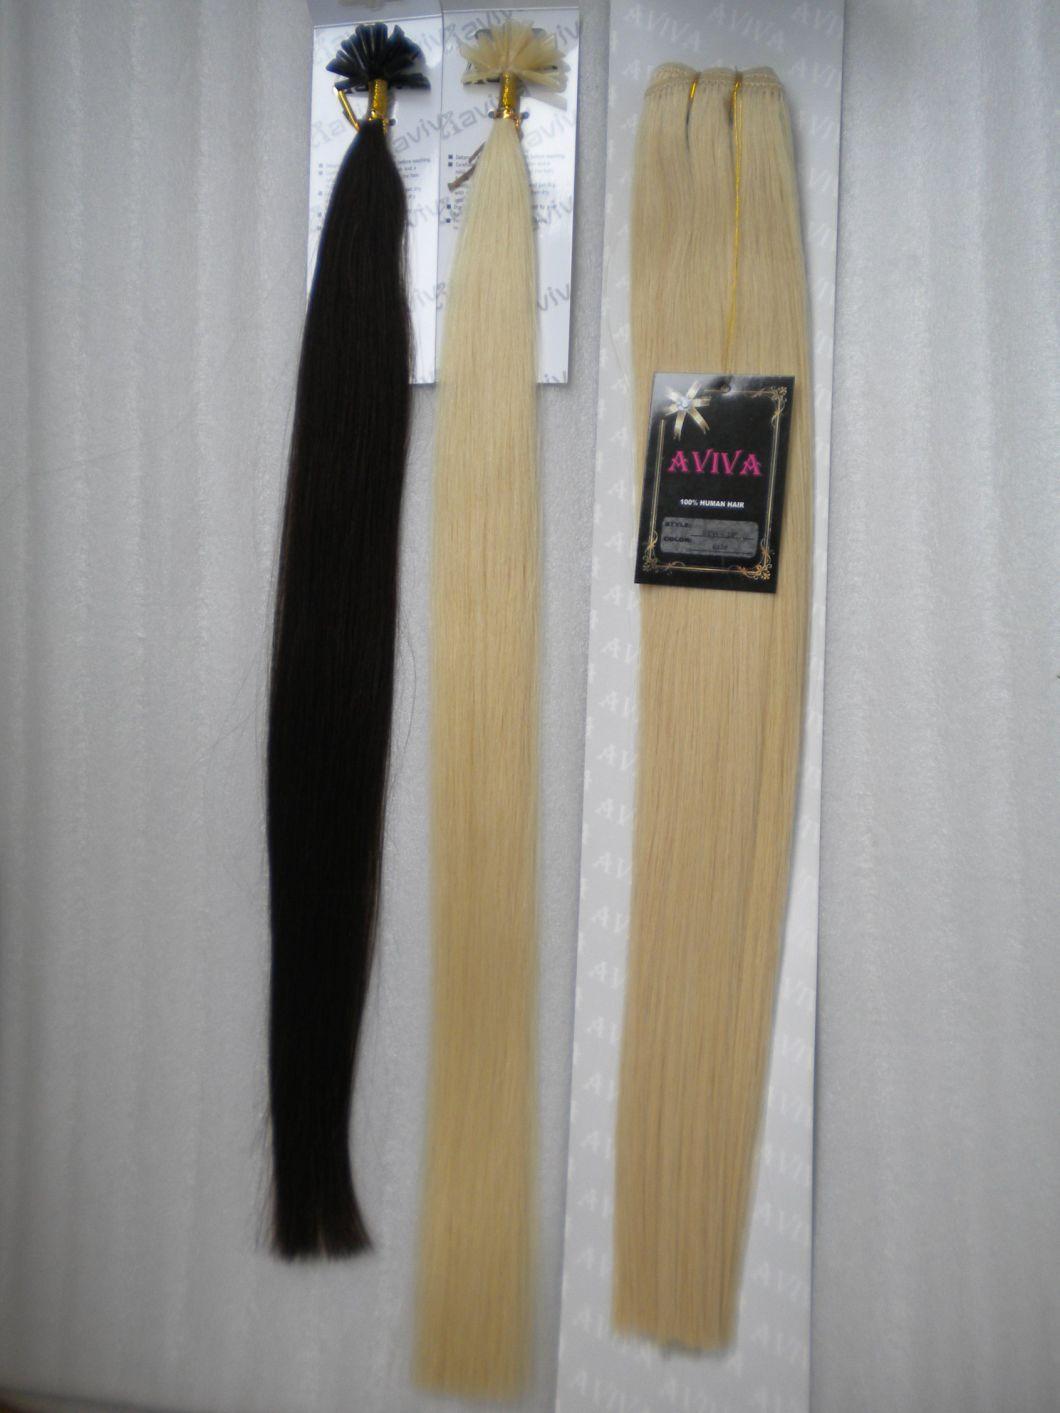 8"-30" Double Drawn T Color P Color Human Hair Weft Extension